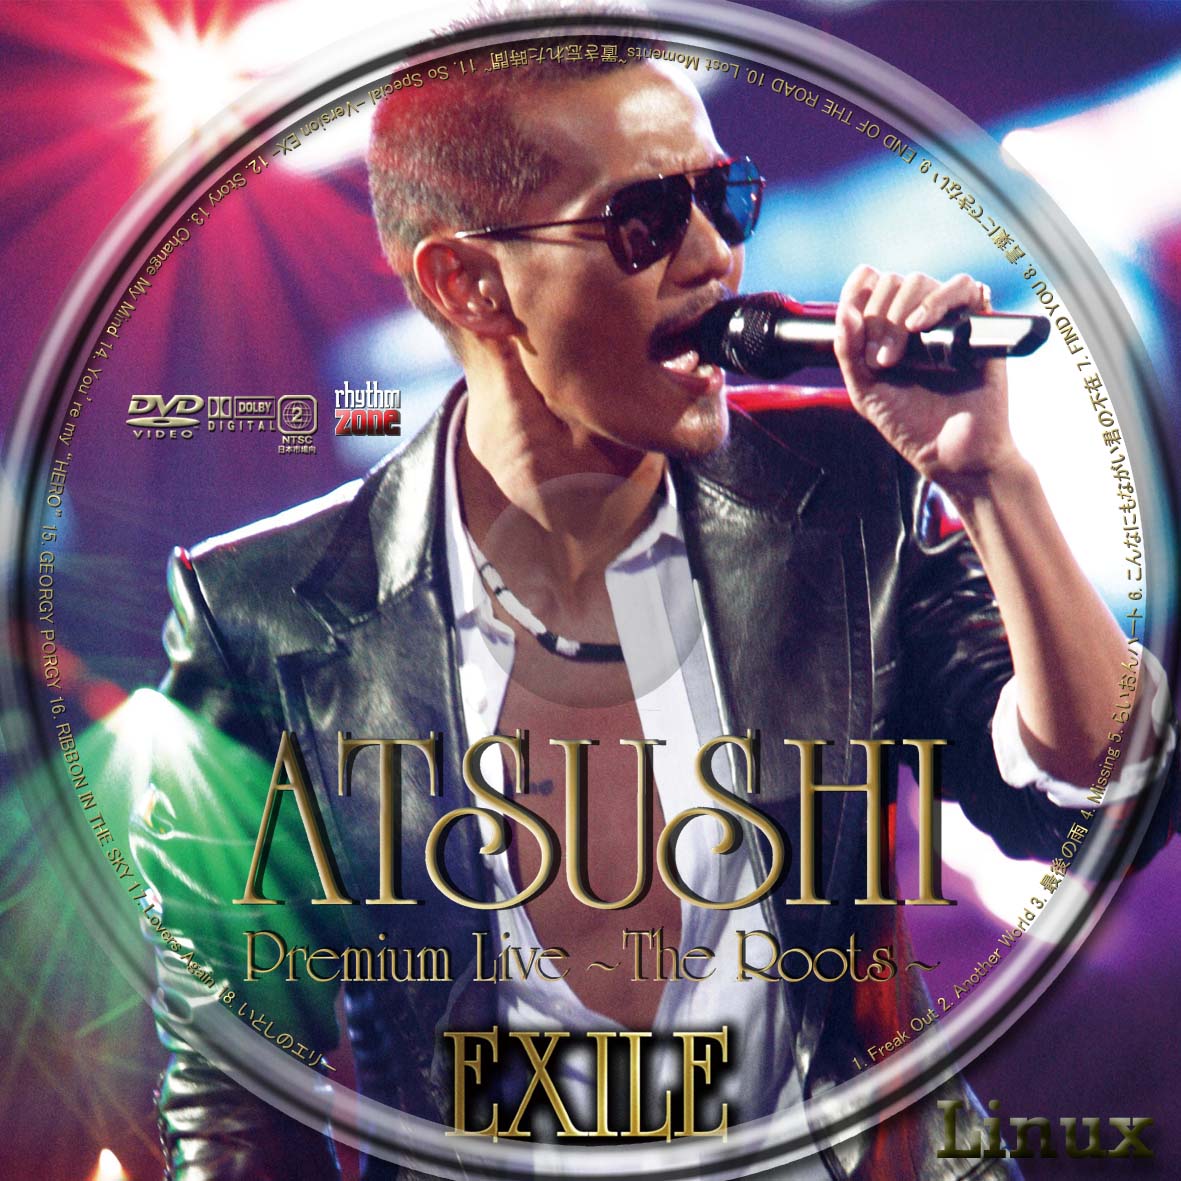 exile atsushi premium live the roots